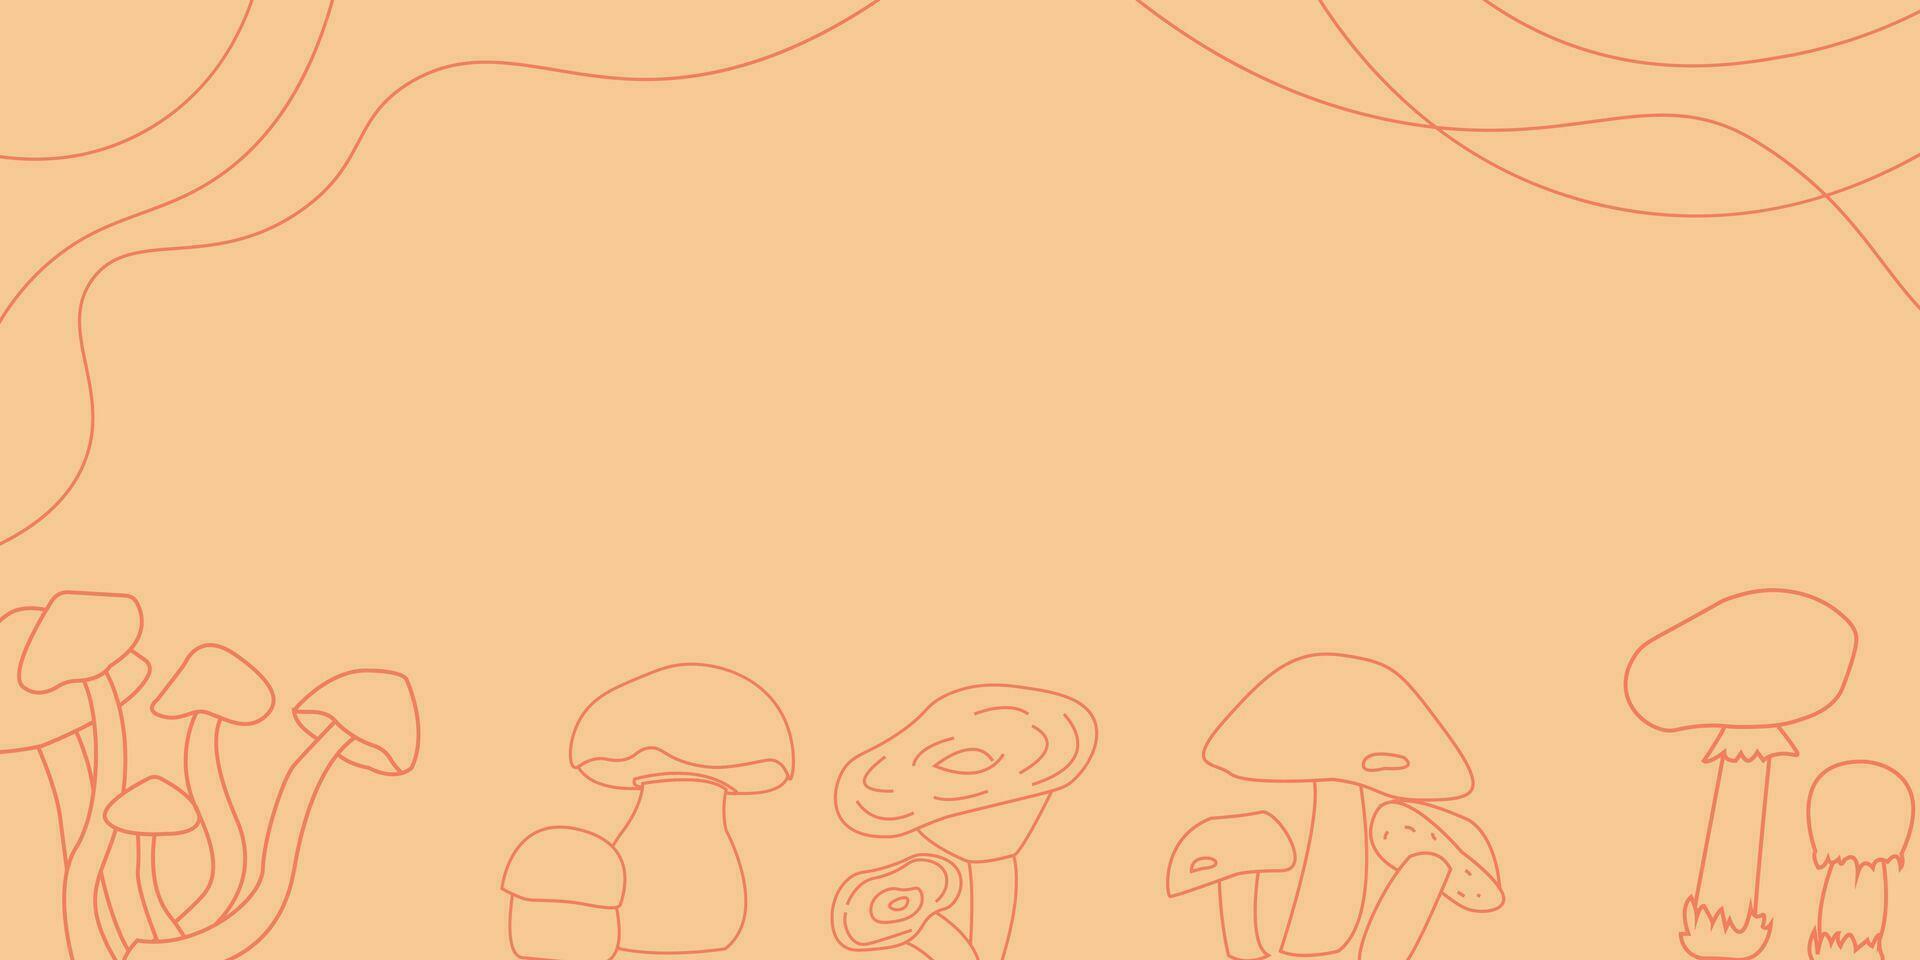 Background with autumn mushrooms and lines. Minimalistic style vector